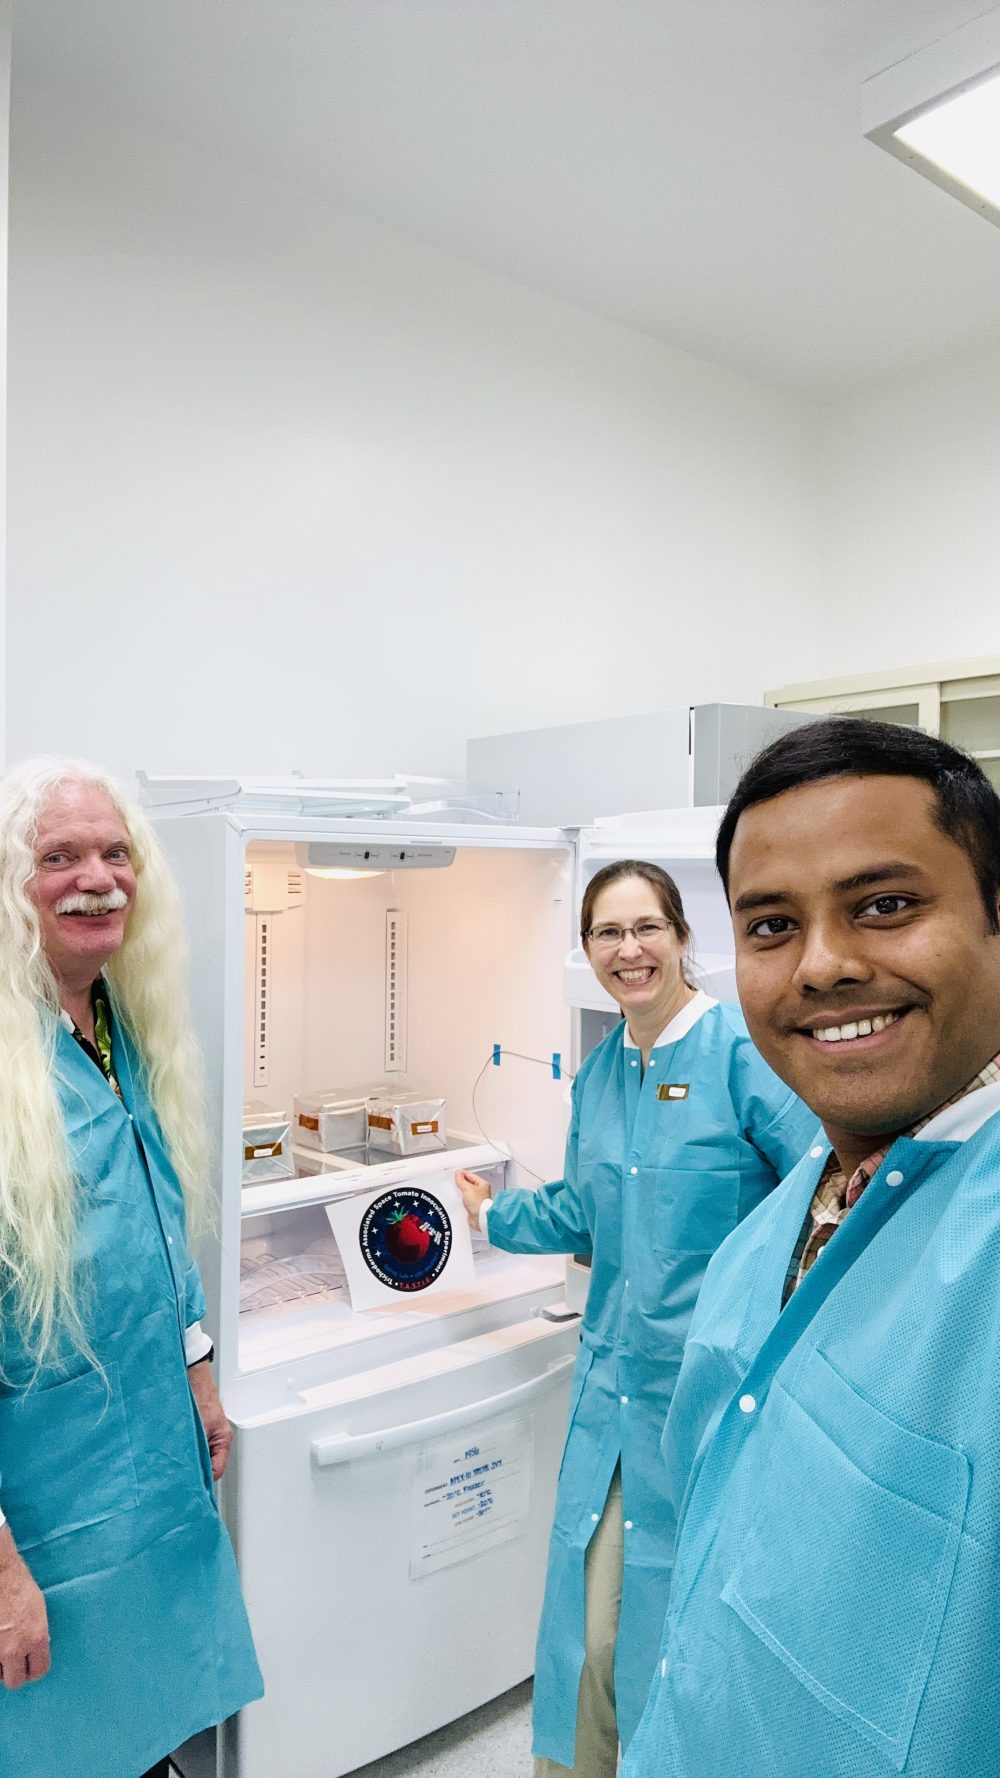 Portrait three people: a Caucasian man with a mustache and long blond-grey hair; a Caucasian woman with glasses and brown hair in a ponytail; and an African American man with short hair. All are wearing blue lab coats and smiling as they prepare their experiment.